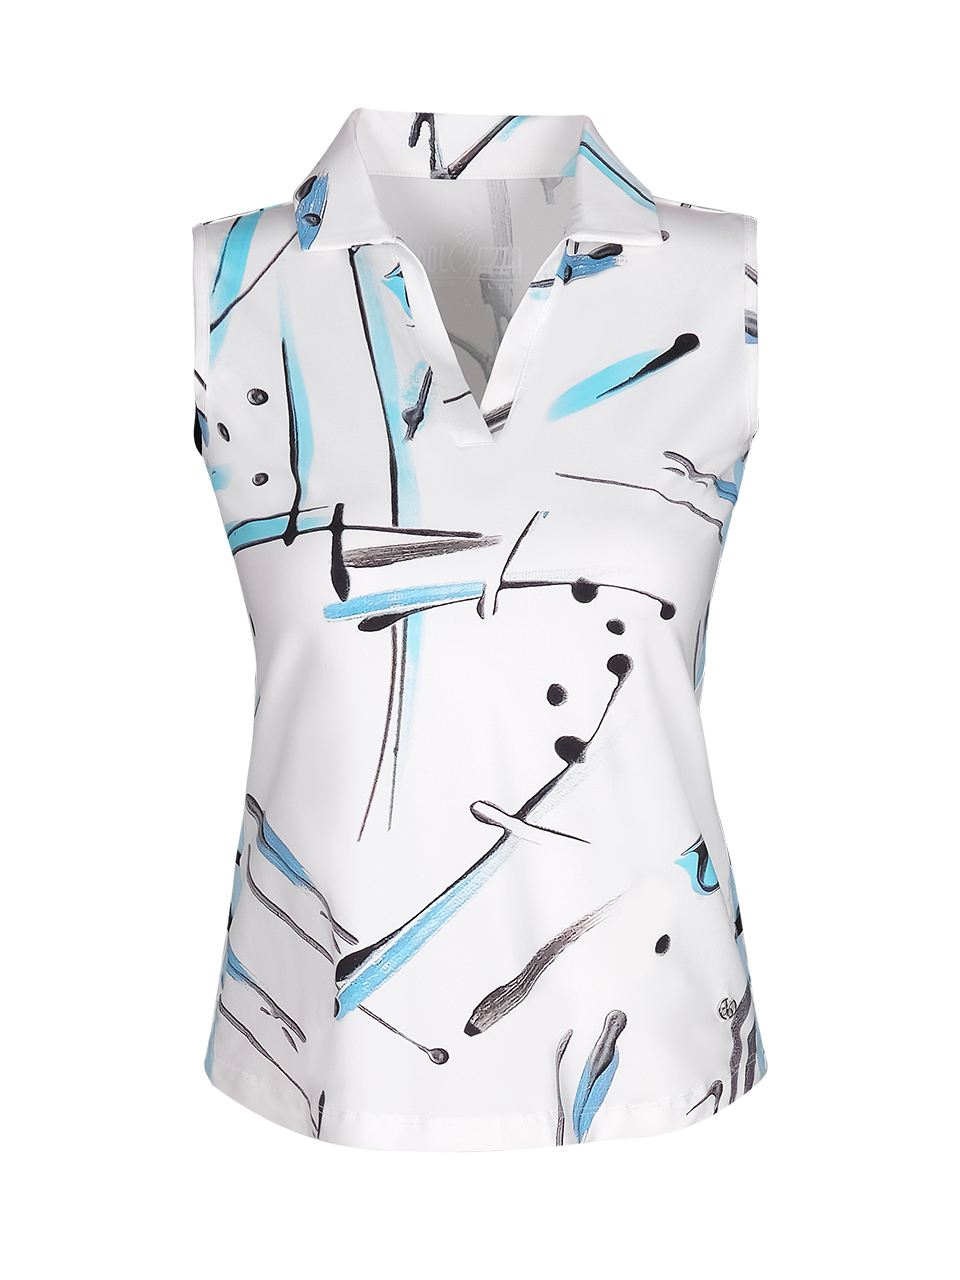 Golf Club Dolcezza: Thetys Abstract Art 4-Way Stretch Comfort Top (Ships Immed, 1 Left at a Special price!) Dolcezza_GolfClub_22423